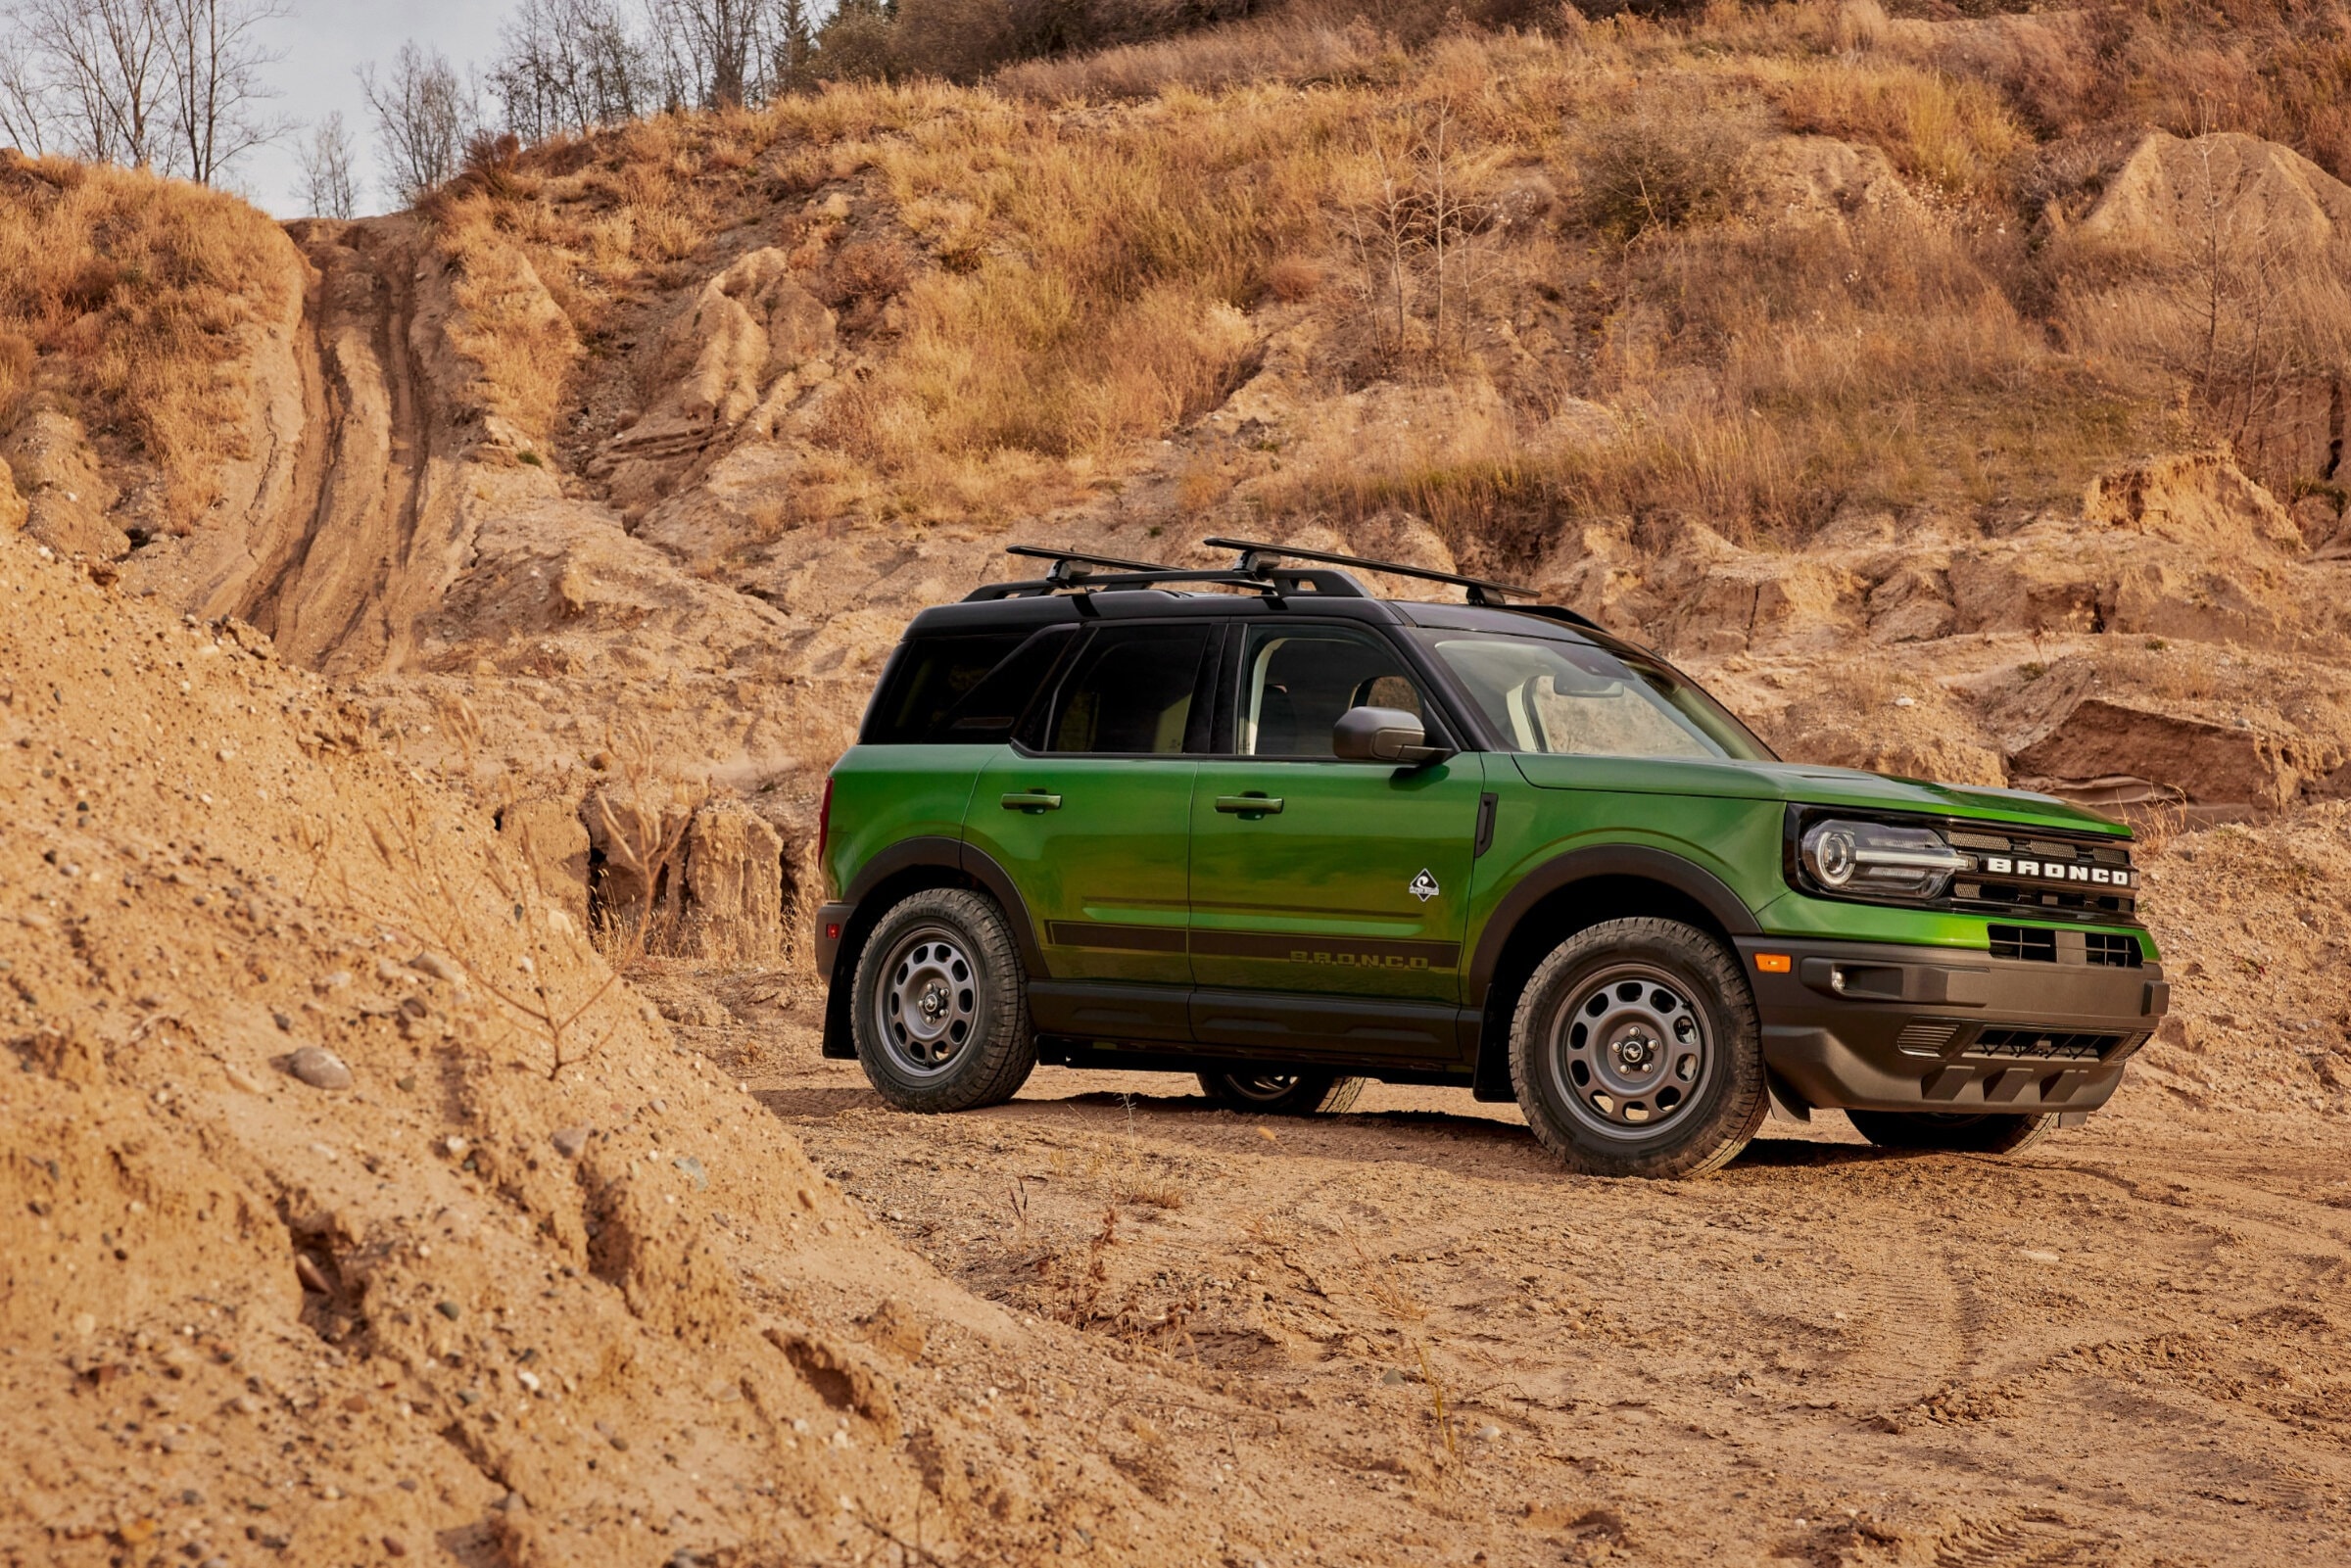 A green ford bronco sport with a black diamond package crossover off-road SUV.